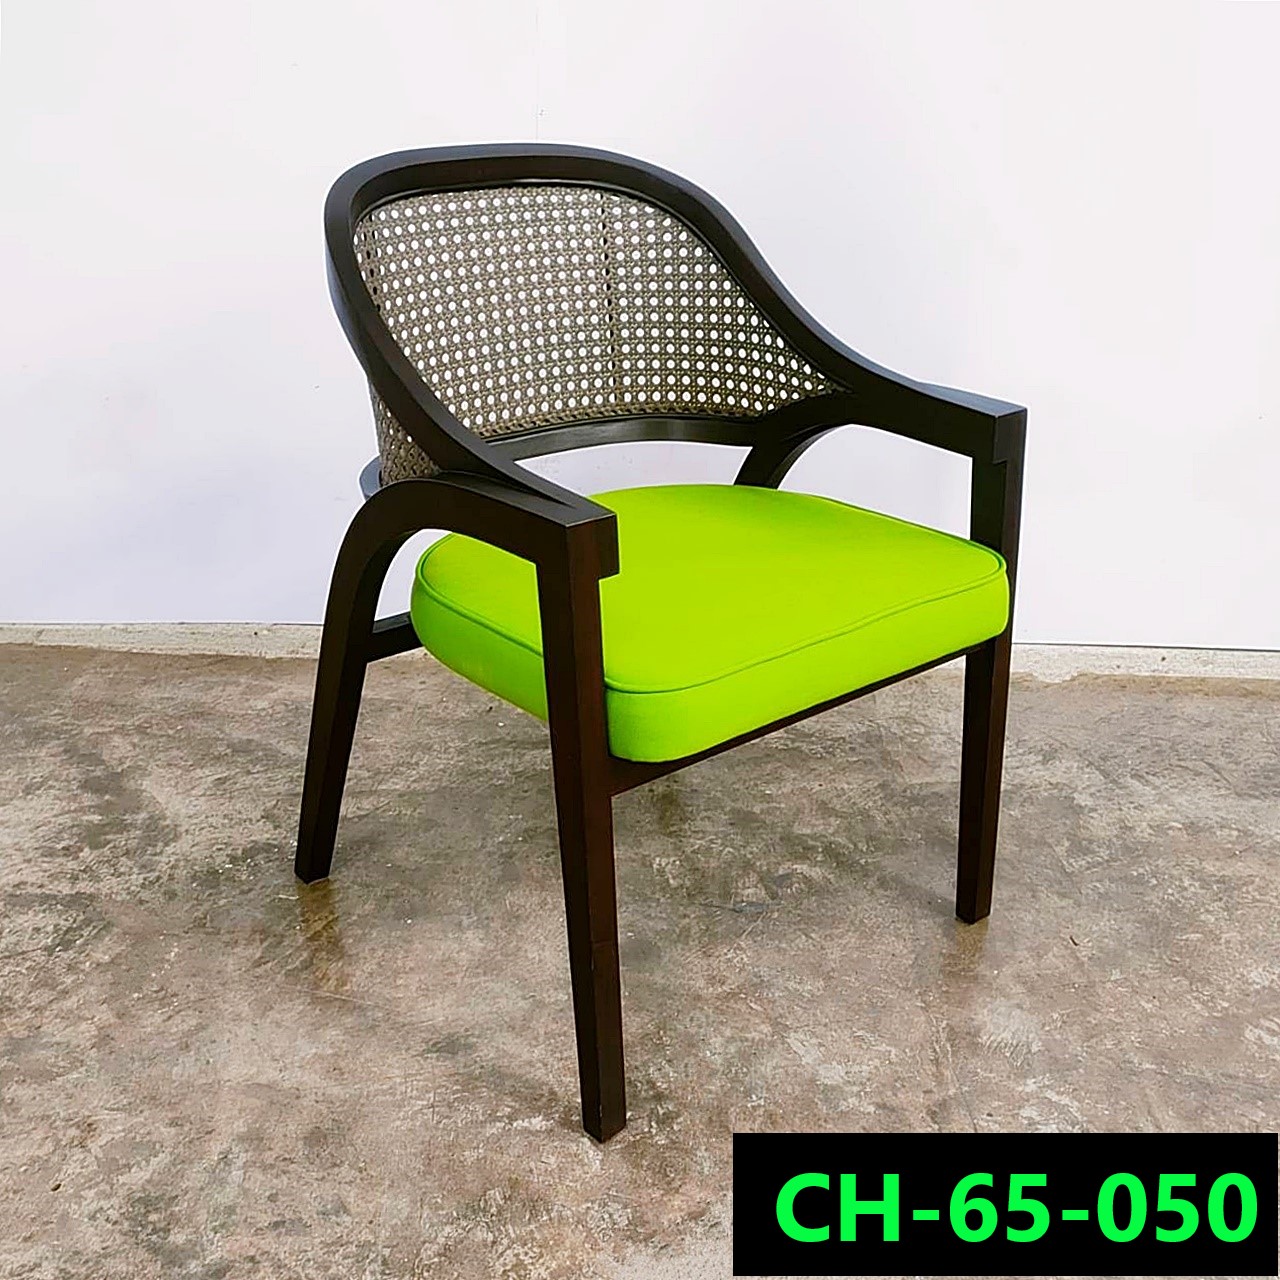 Chair set Product code CH-65-050